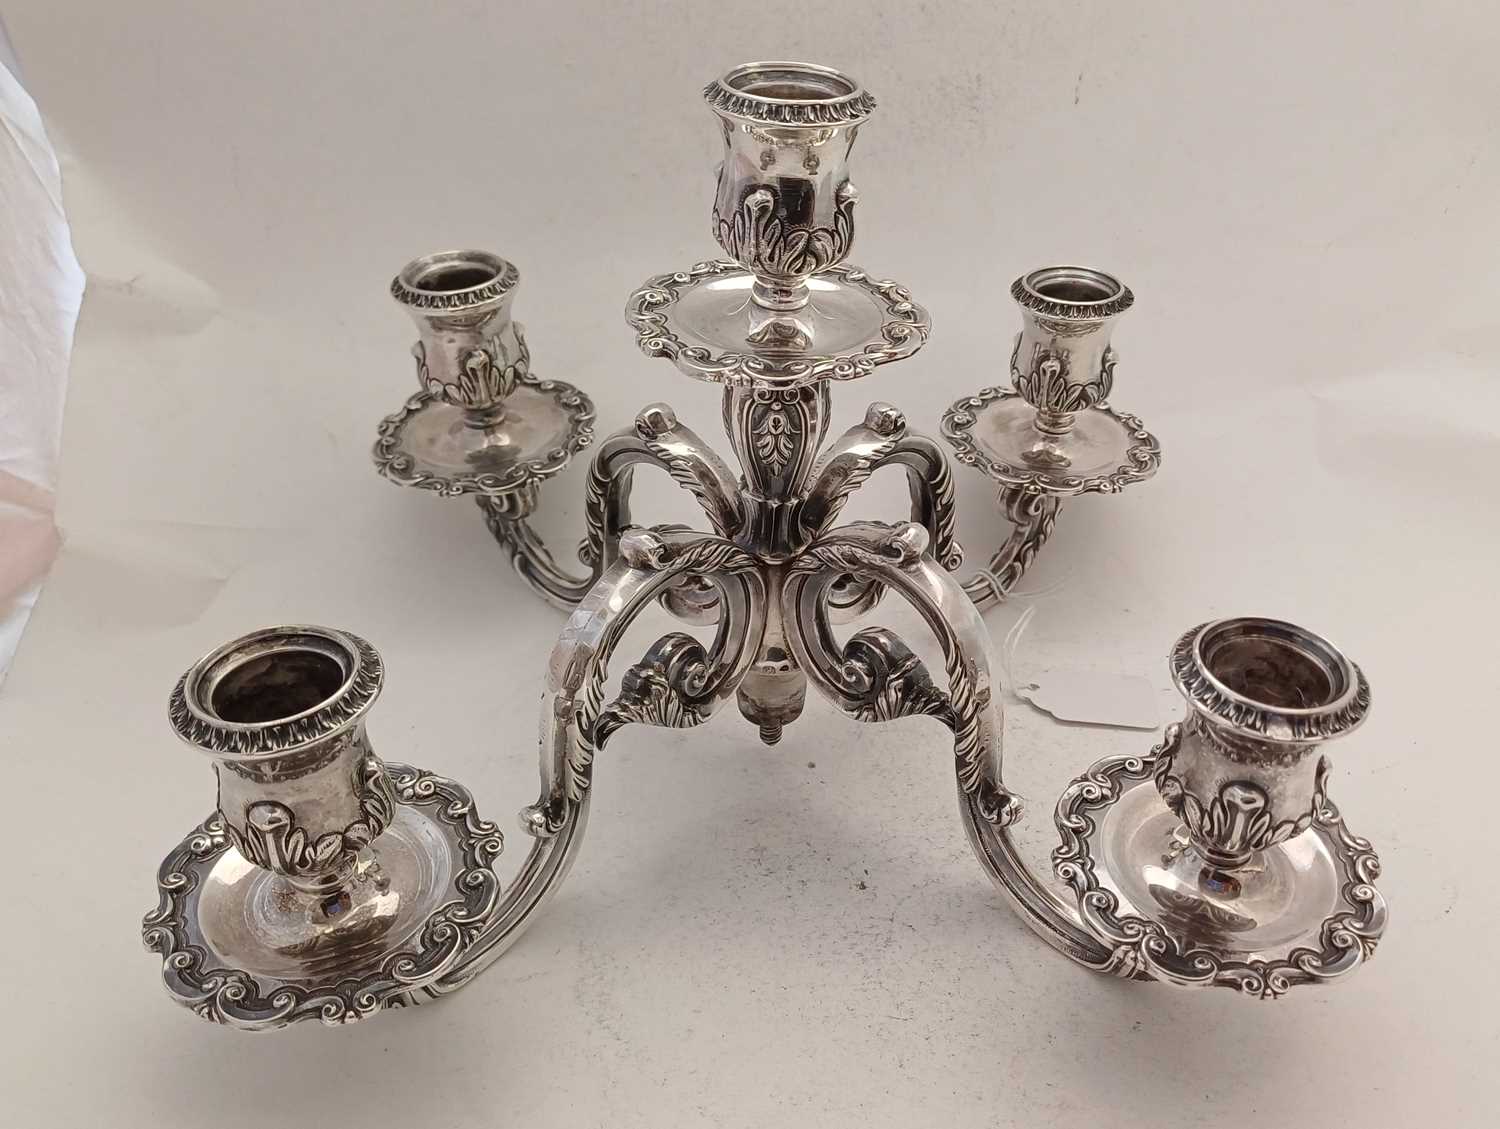 A Pair of Portuguese Silver Five-Light Candelabra, by Topázio, Second Quarter 20th Century - Image 5 of 10